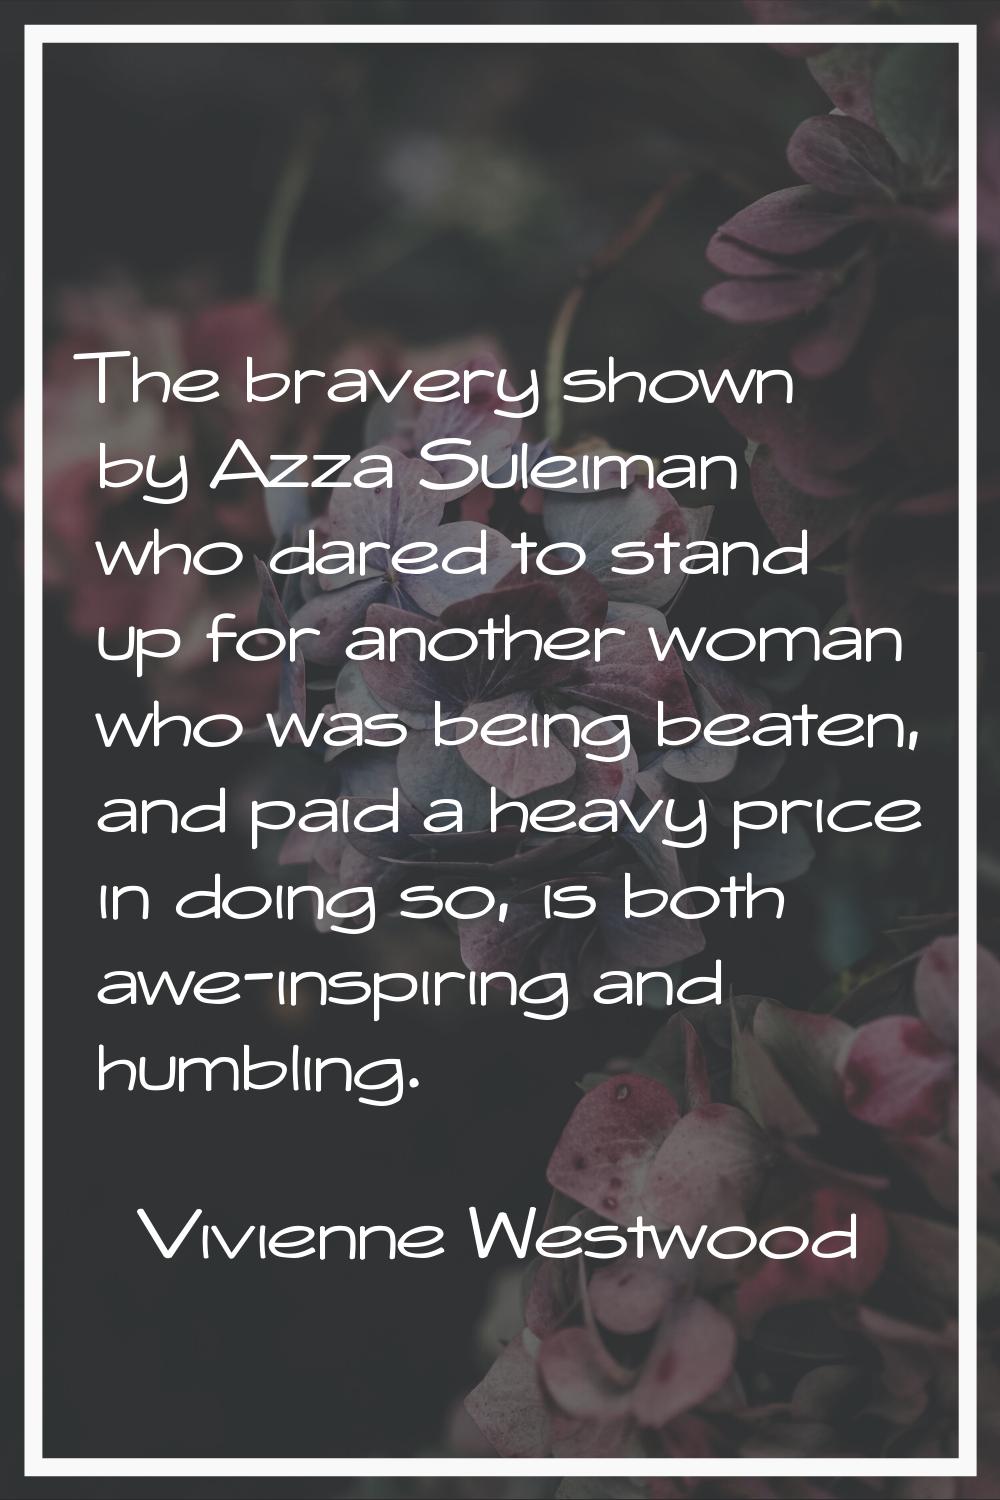 The bravery shown by Azza Suleiman who dared to stand up for another woman who was being beaten, an